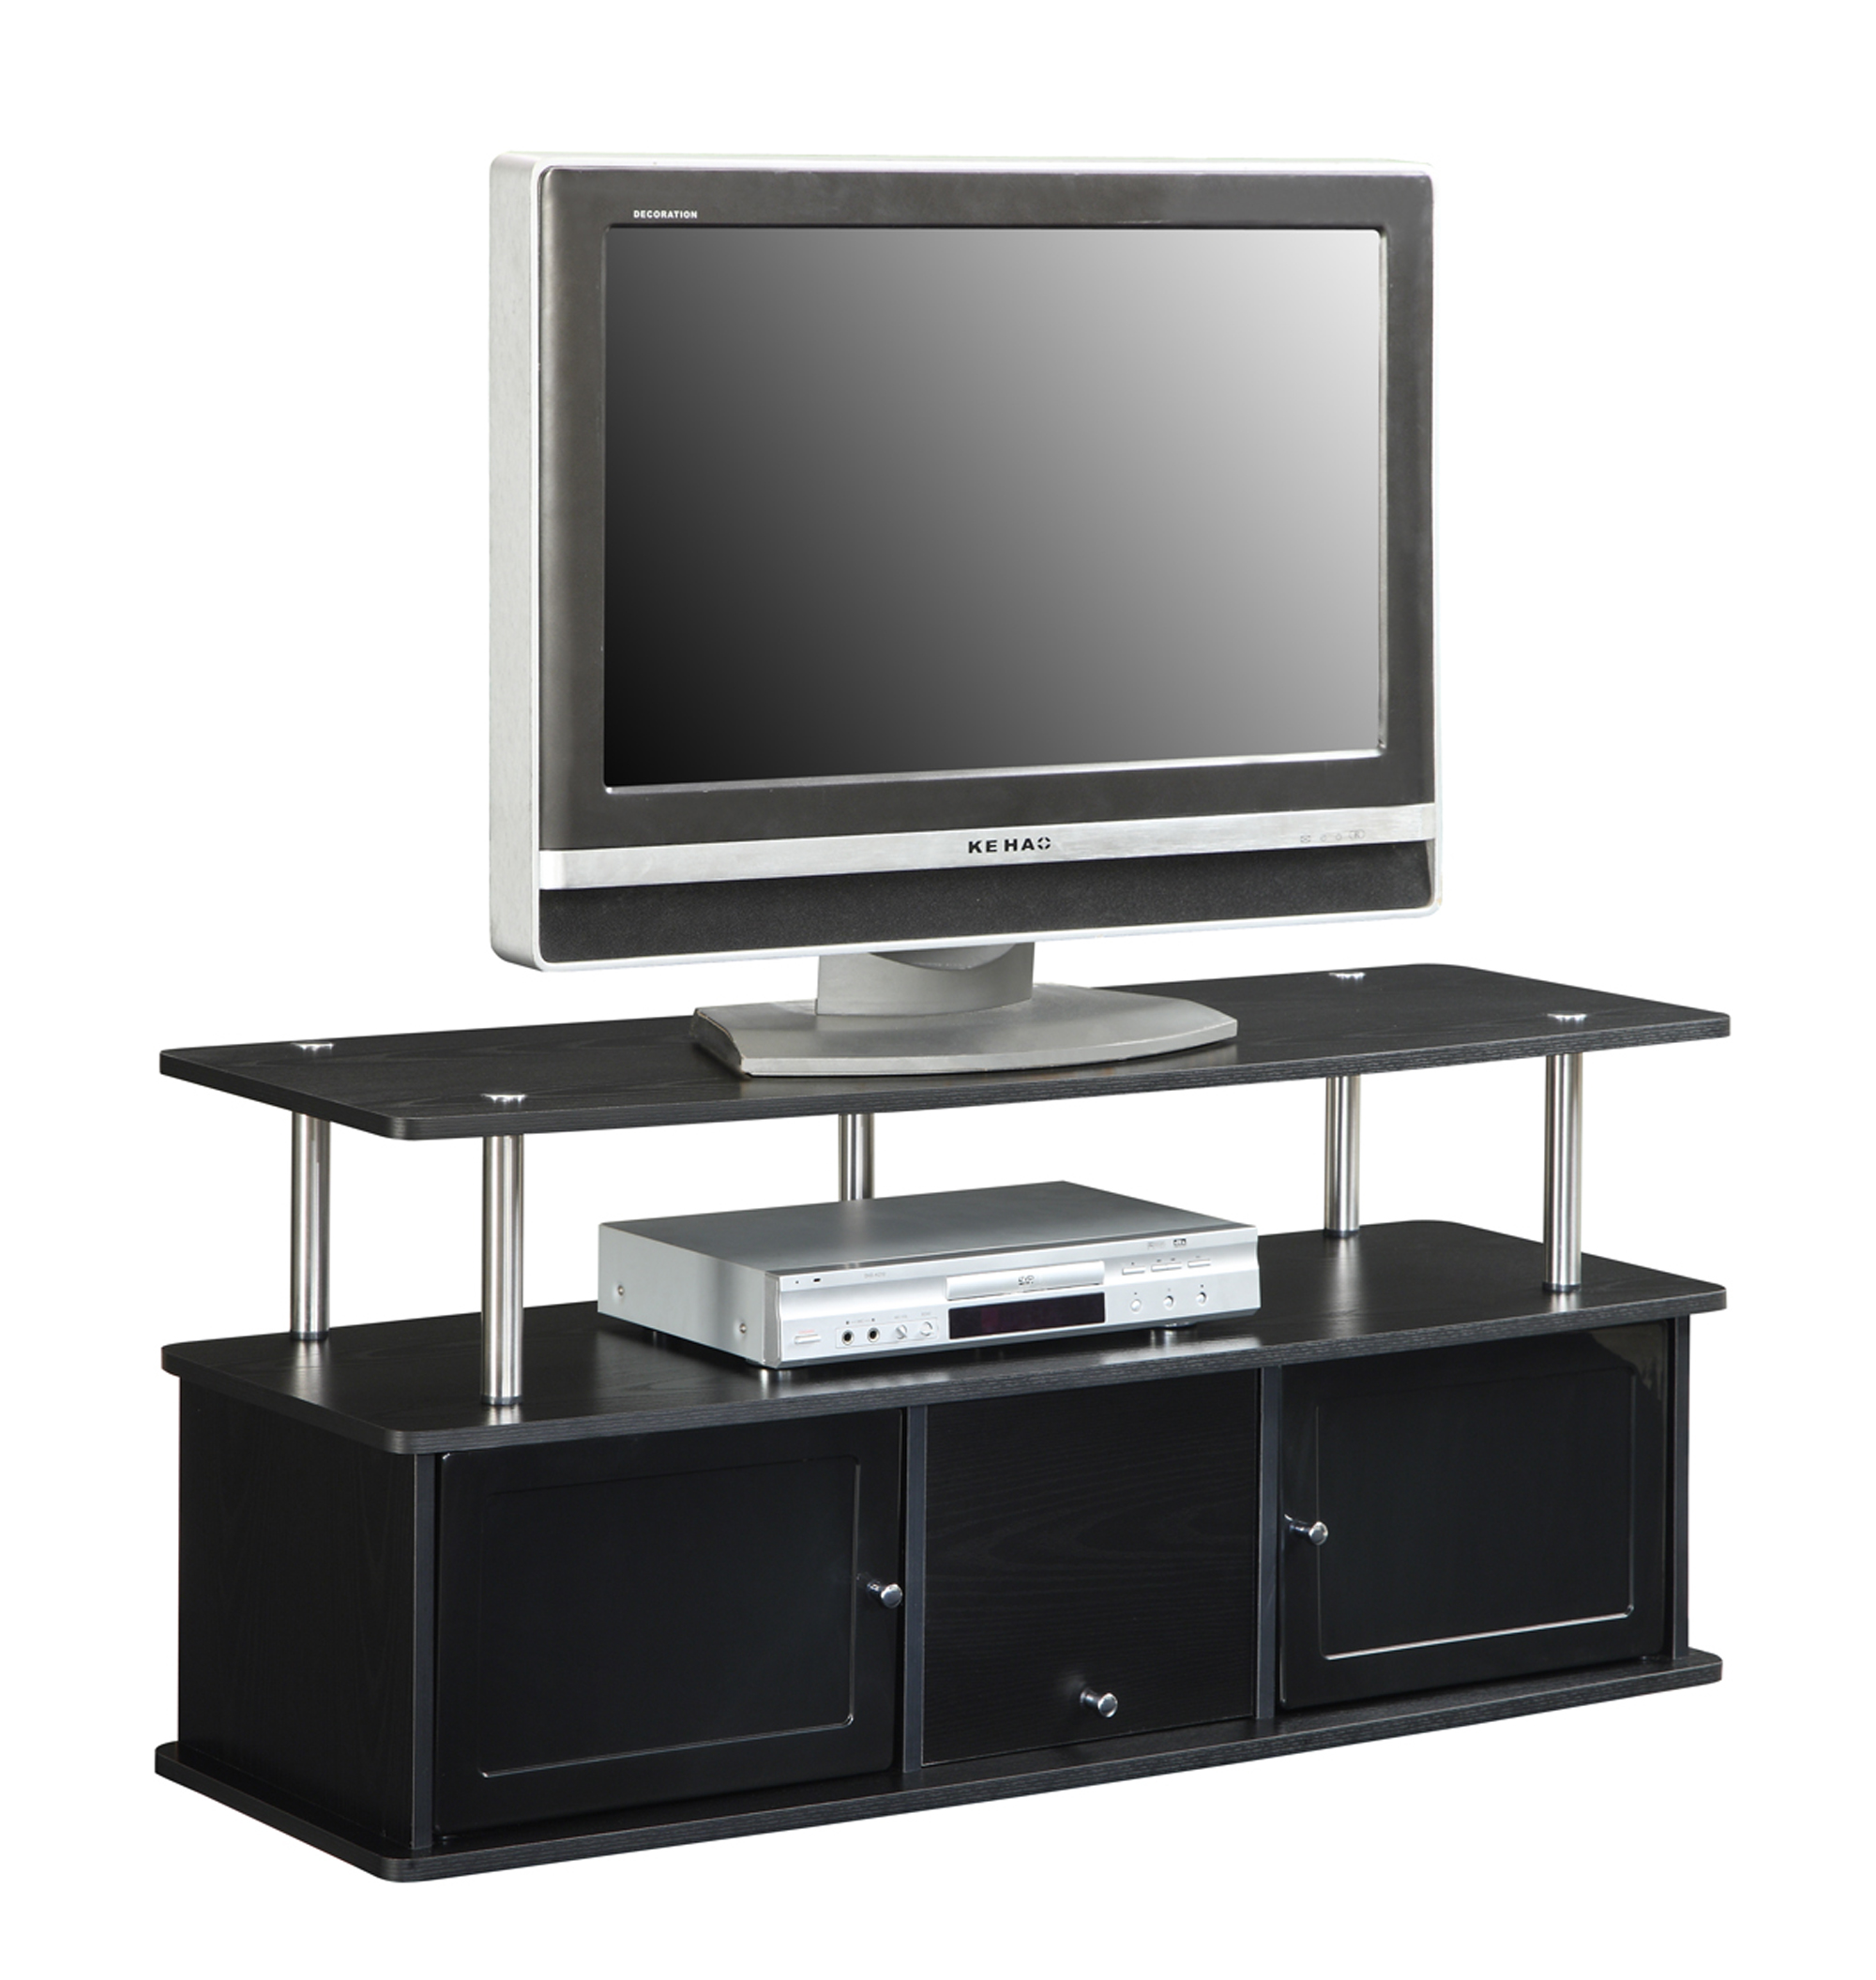 Convenience Concepts Designs2Go Cherry TV Stand with 3 Cabinets for TVs up to 50", Black - image 3 of 5